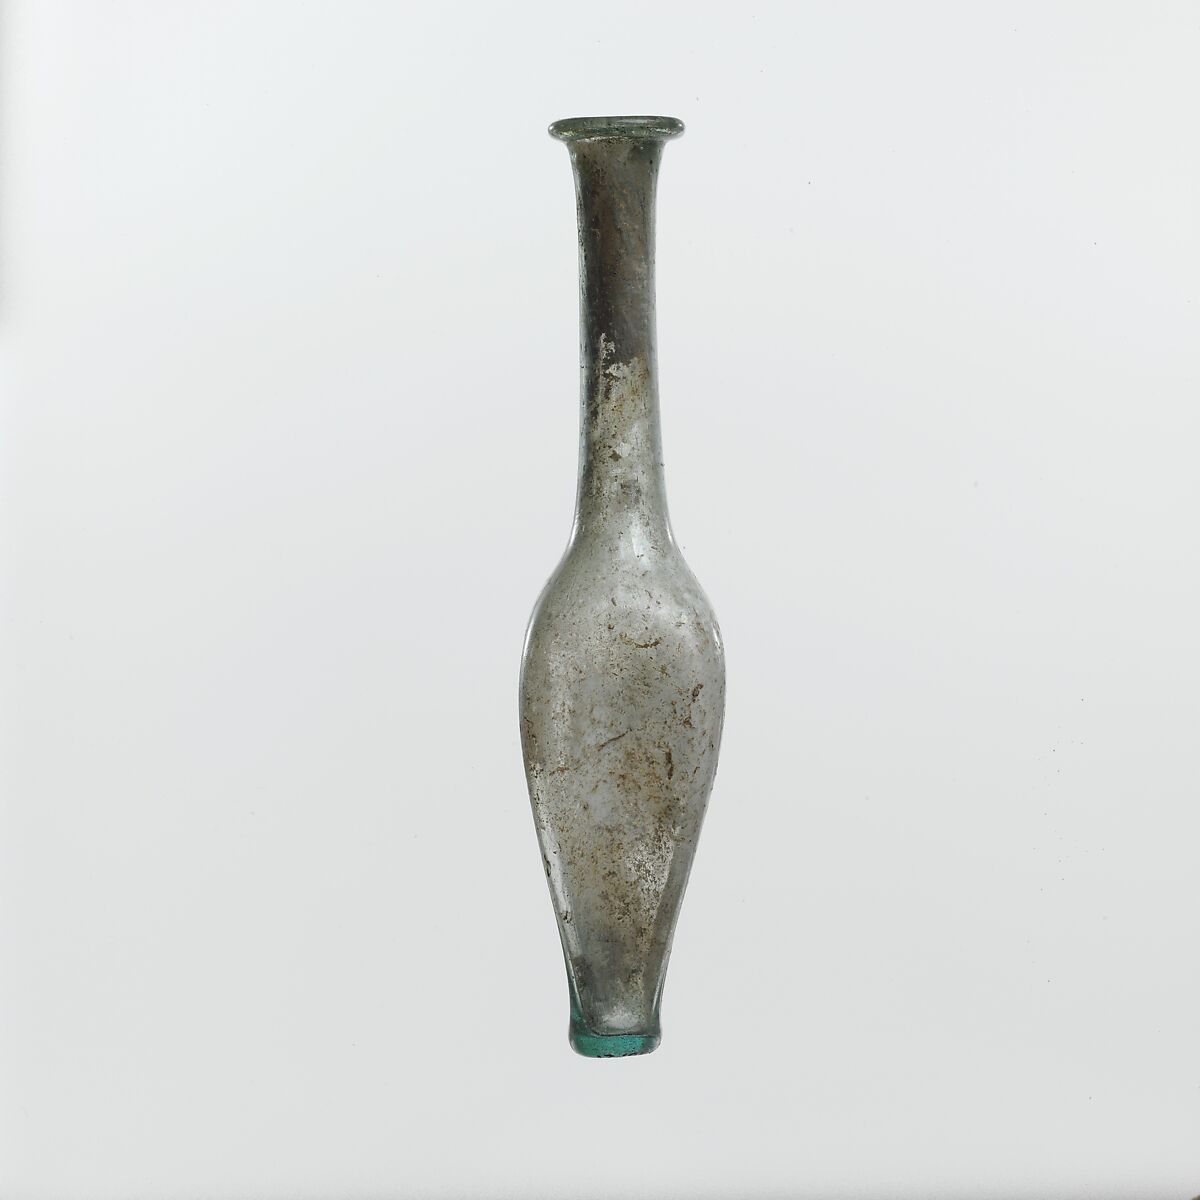 Glass bottle with indented side, Glass, Roman 